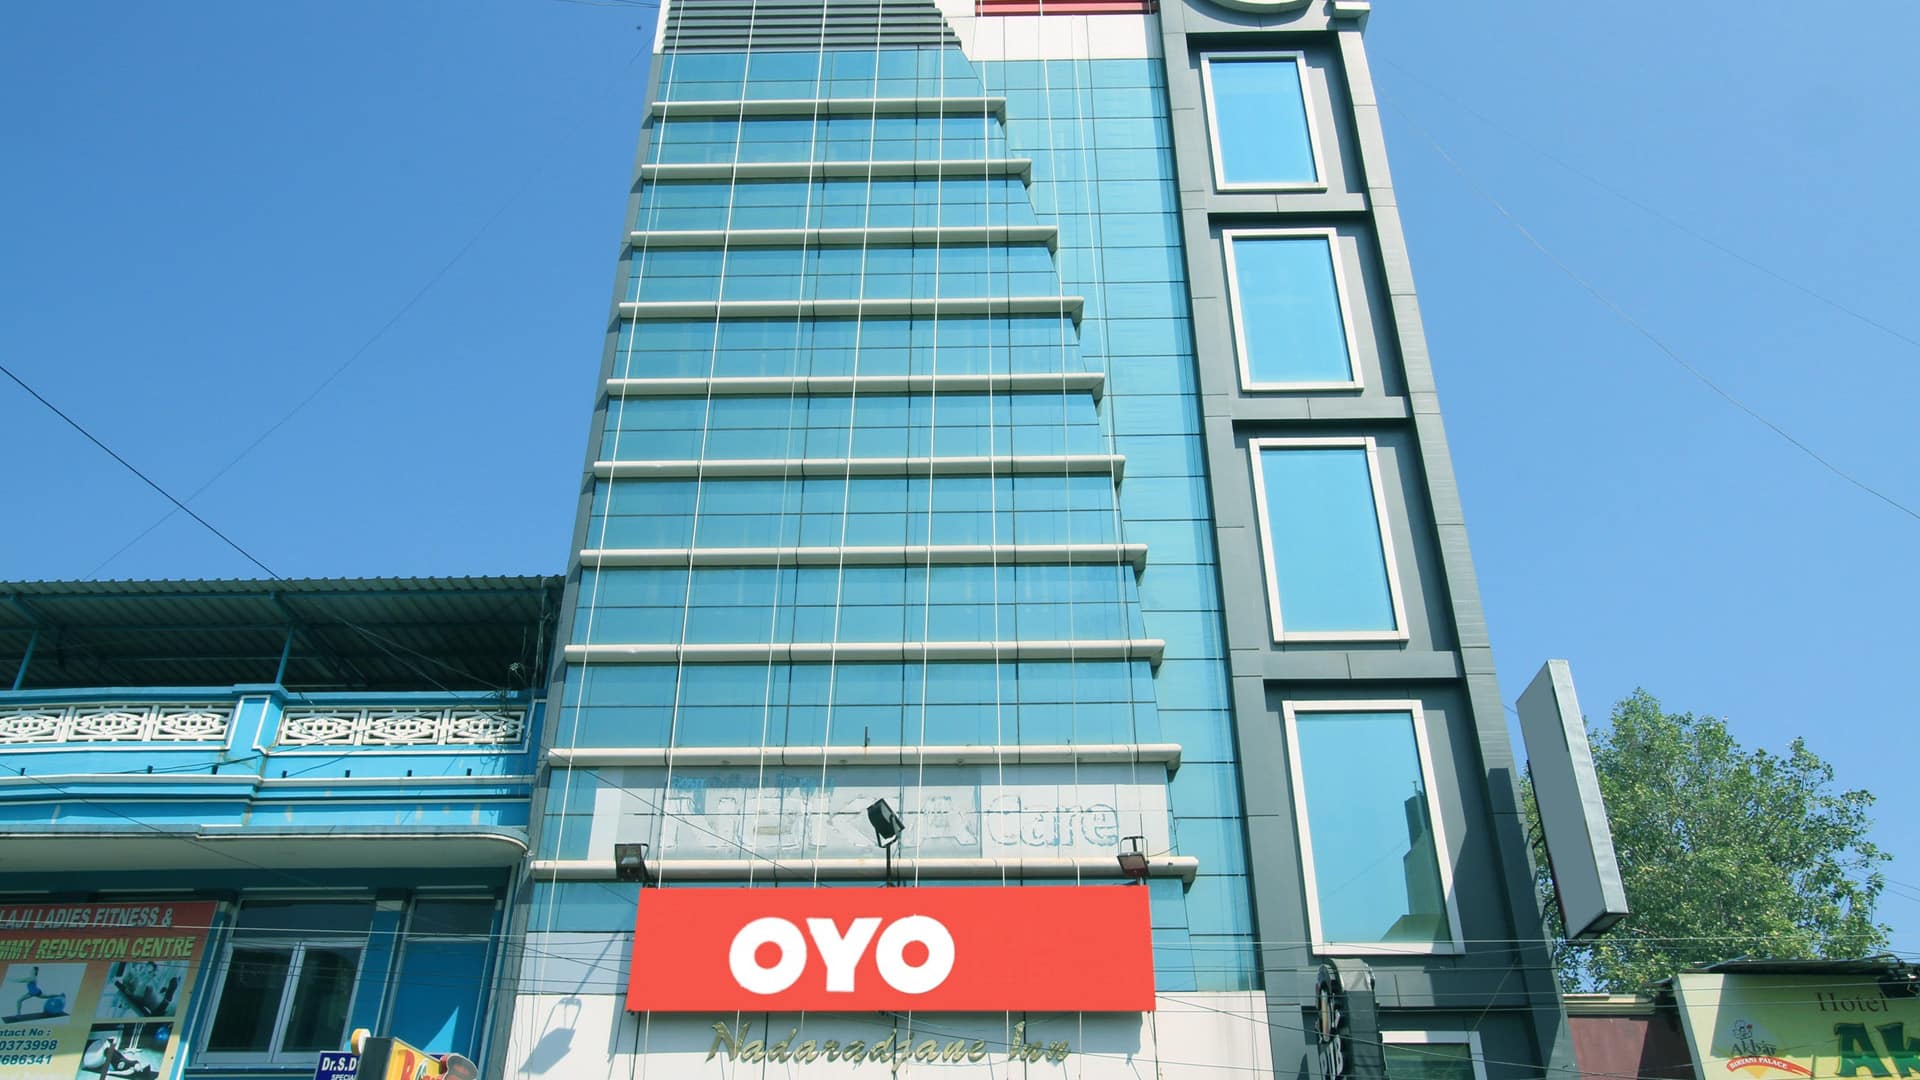 OYO gets USD 660 mn in debt funding to revive covid-hit biz